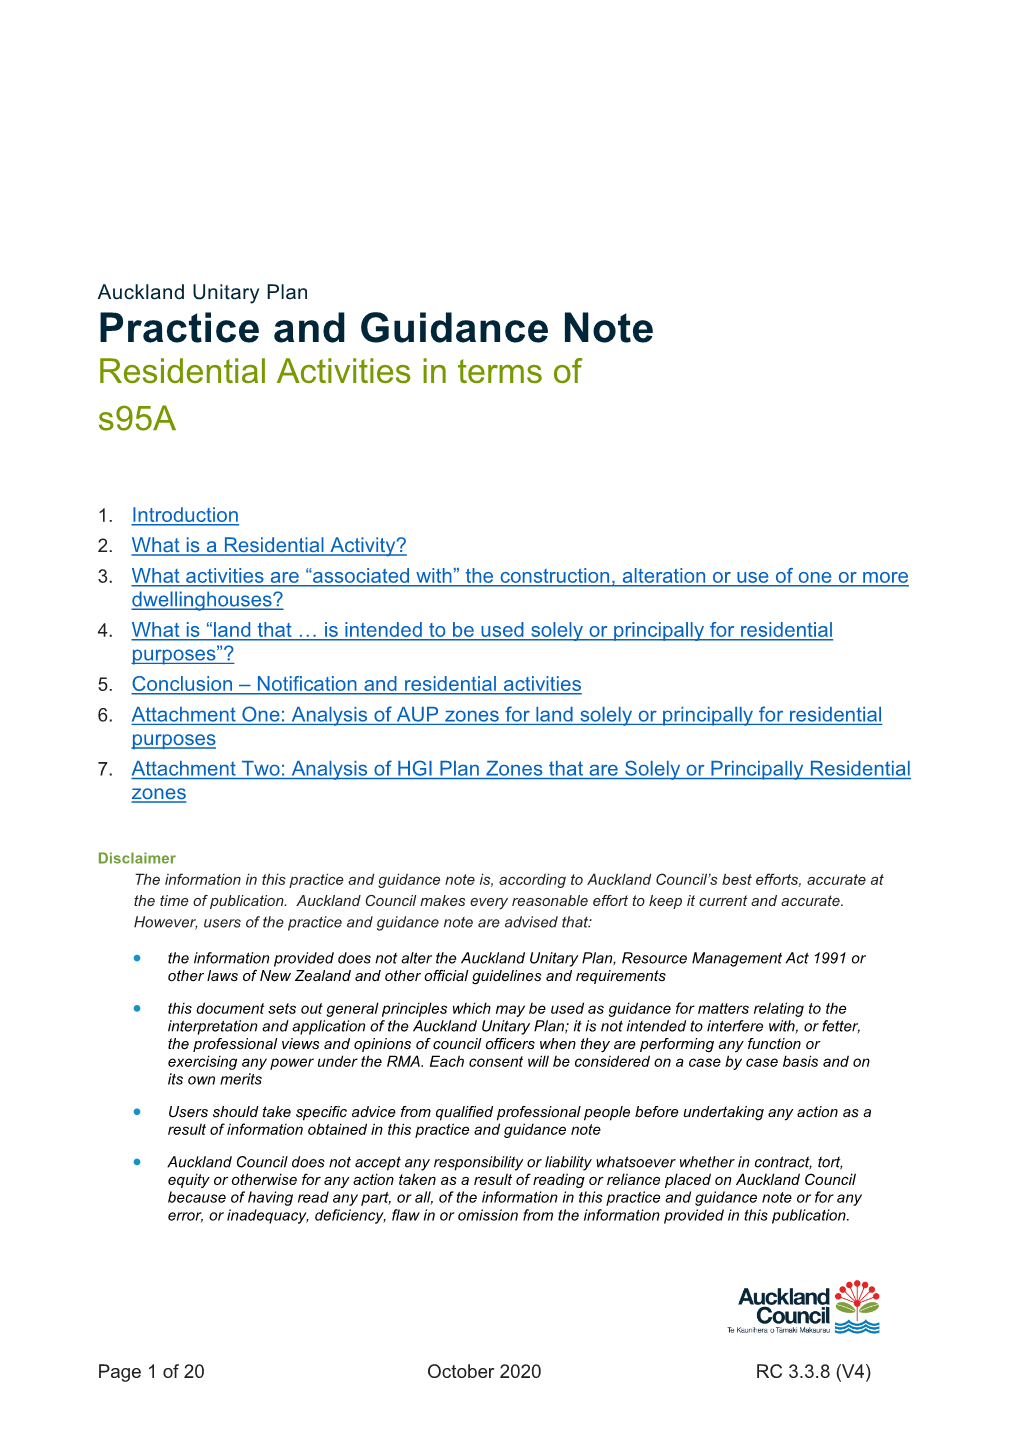 Practice and Guidance Note Residential Activities in Terms of S95a